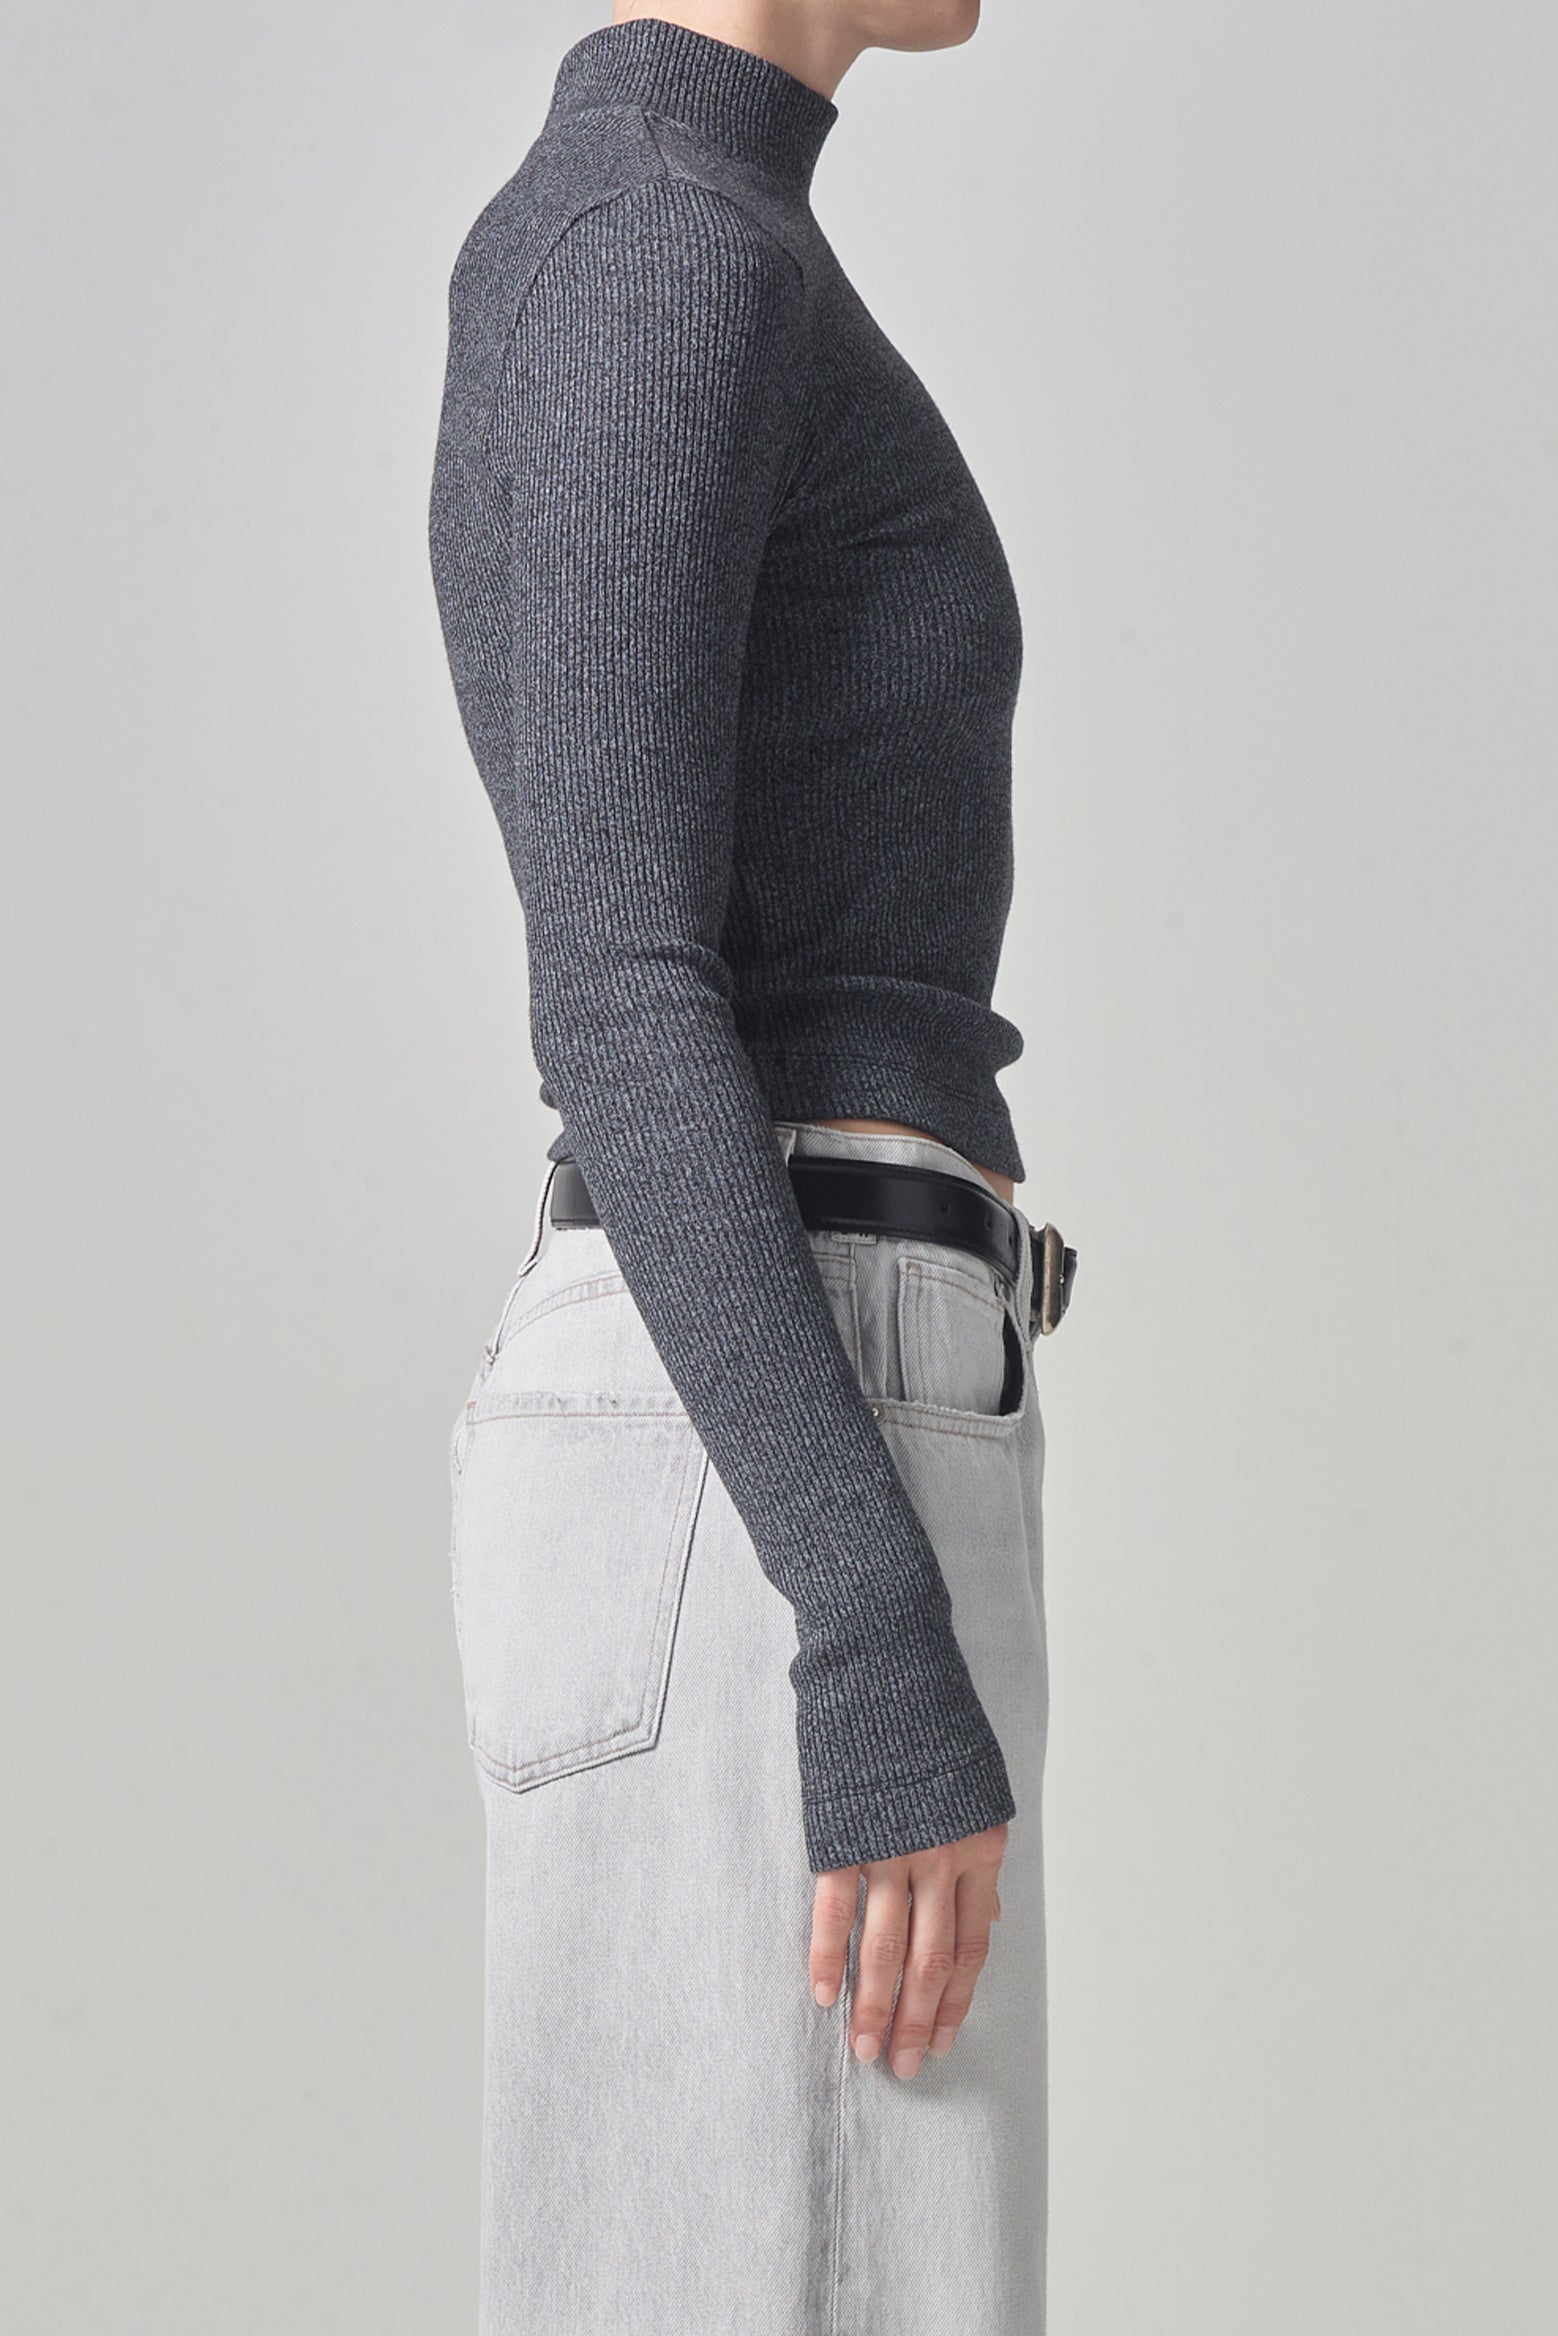 Citizens Of Humanity Annatole Mock Neck in Charcoal available at The New Trend Australia.